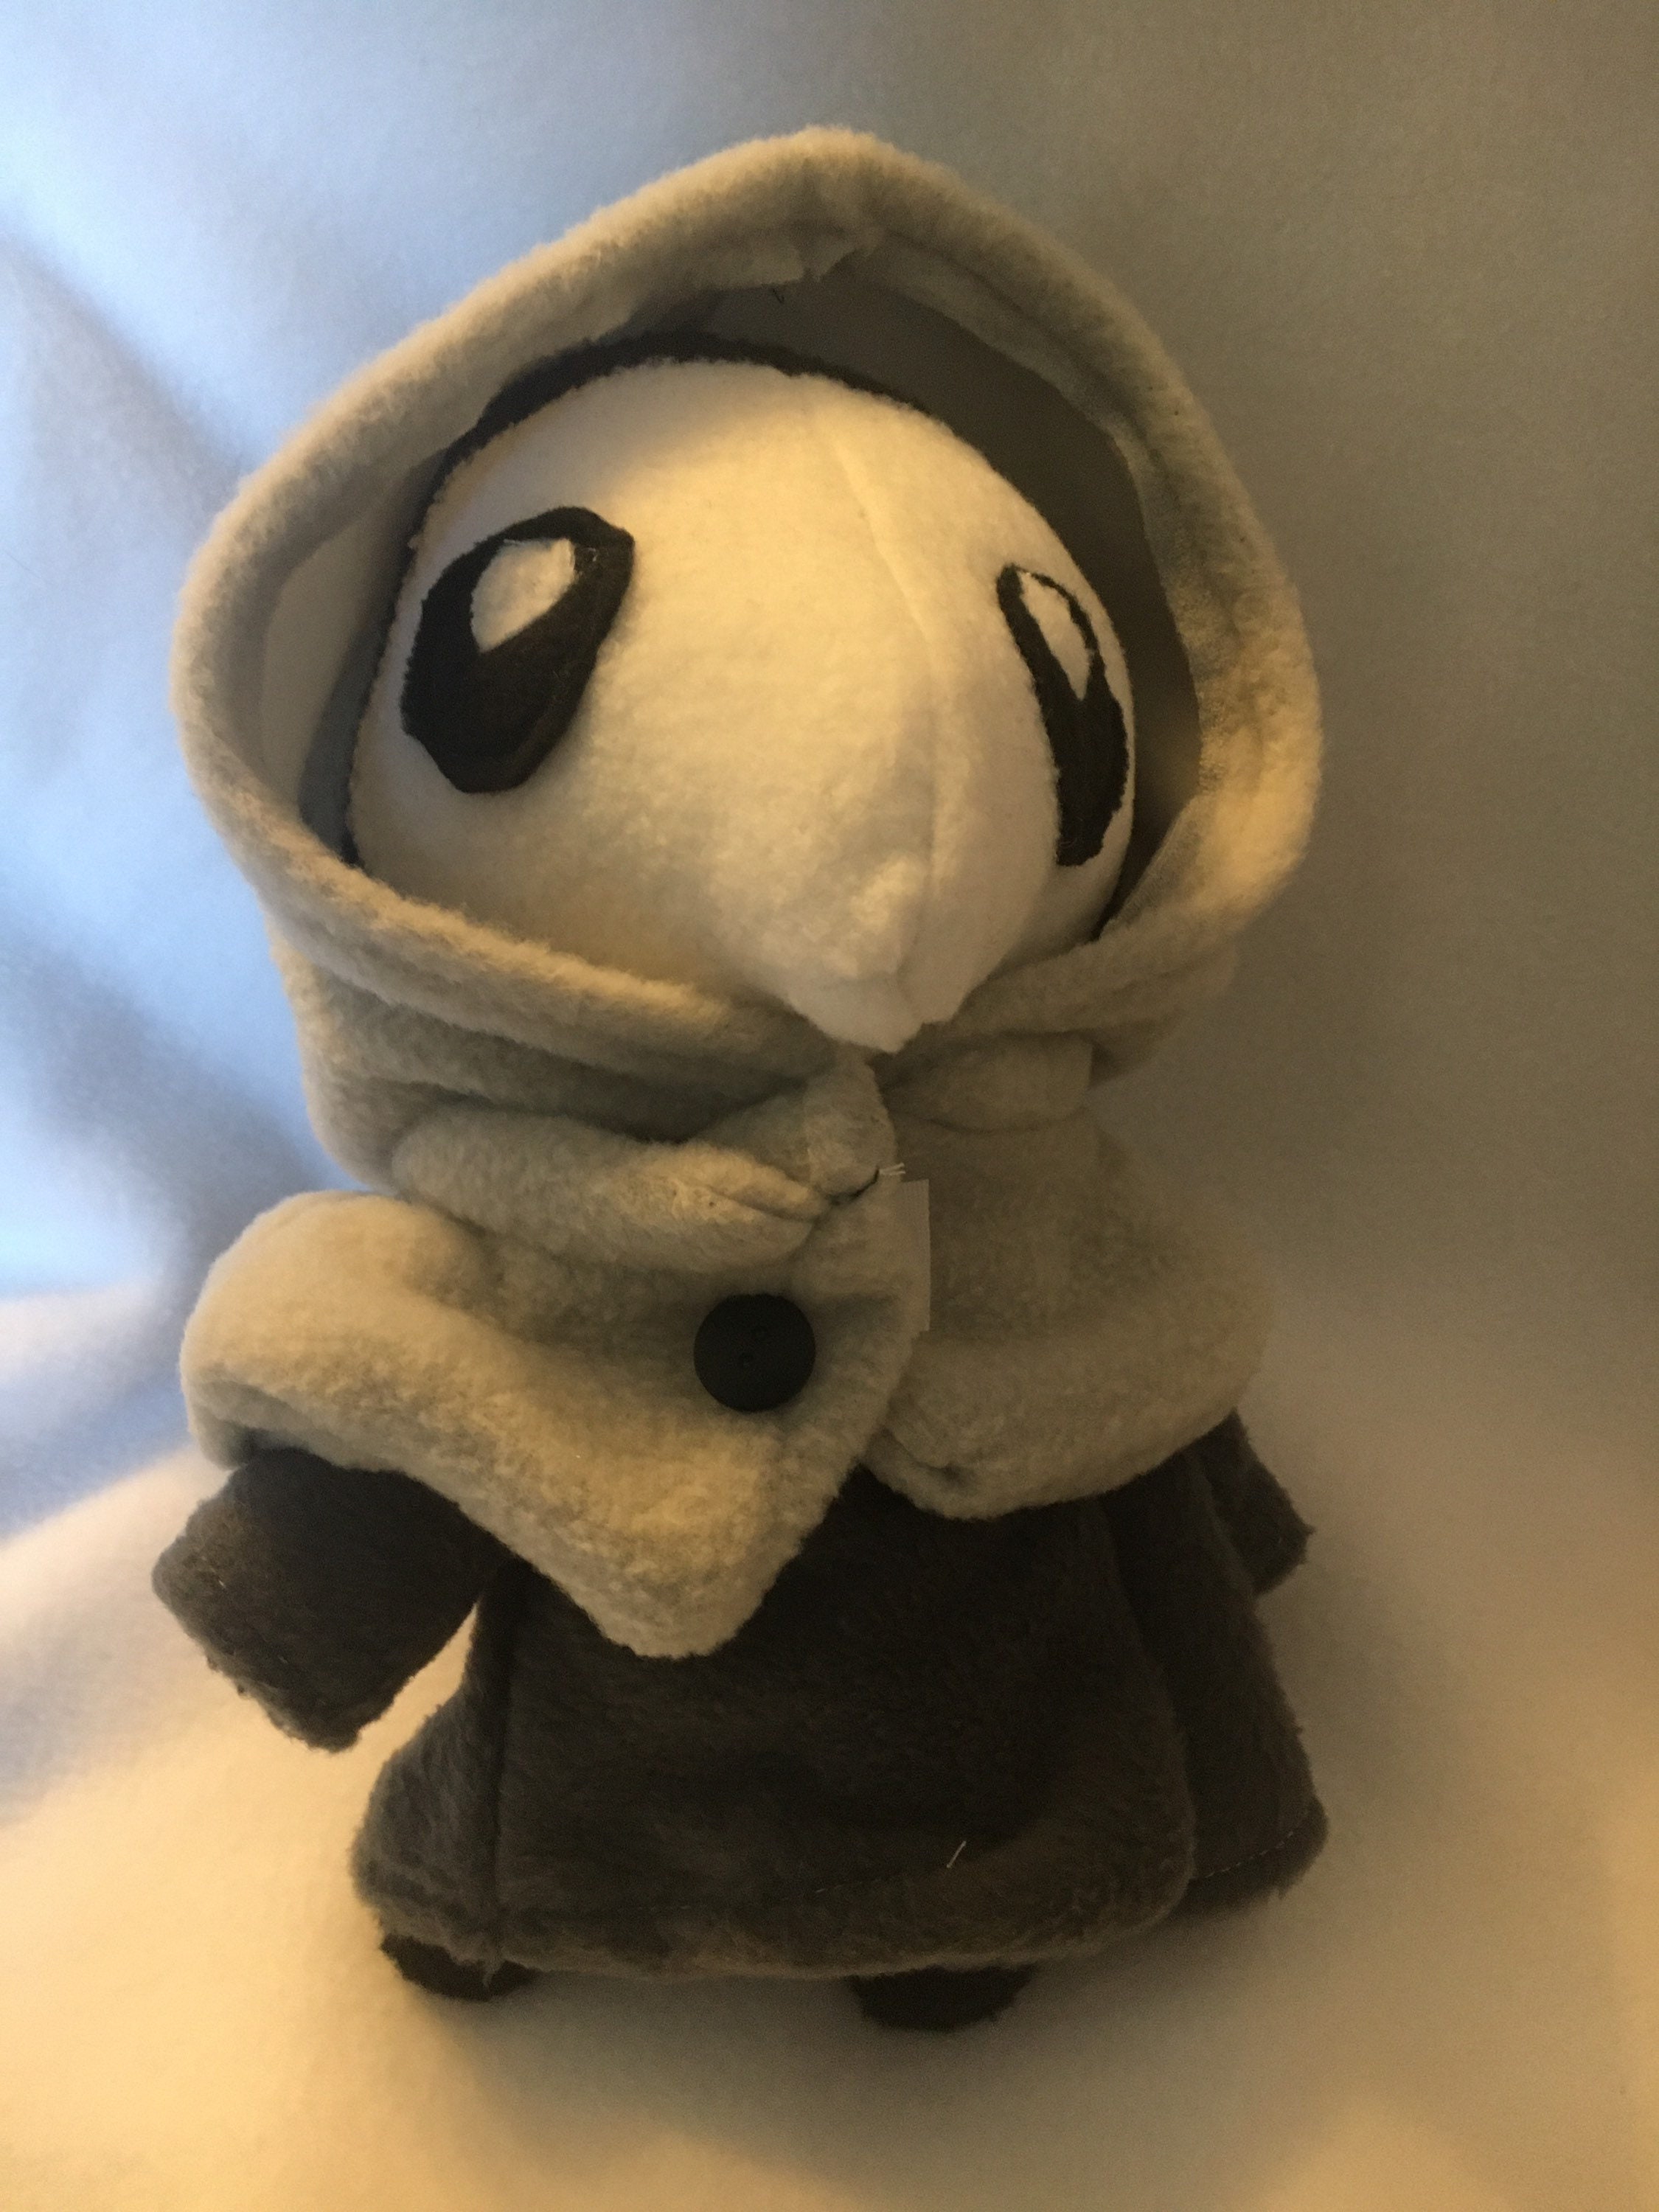 SCP-049 Plague Doctor Soft Plush Toy Gamer Gift 